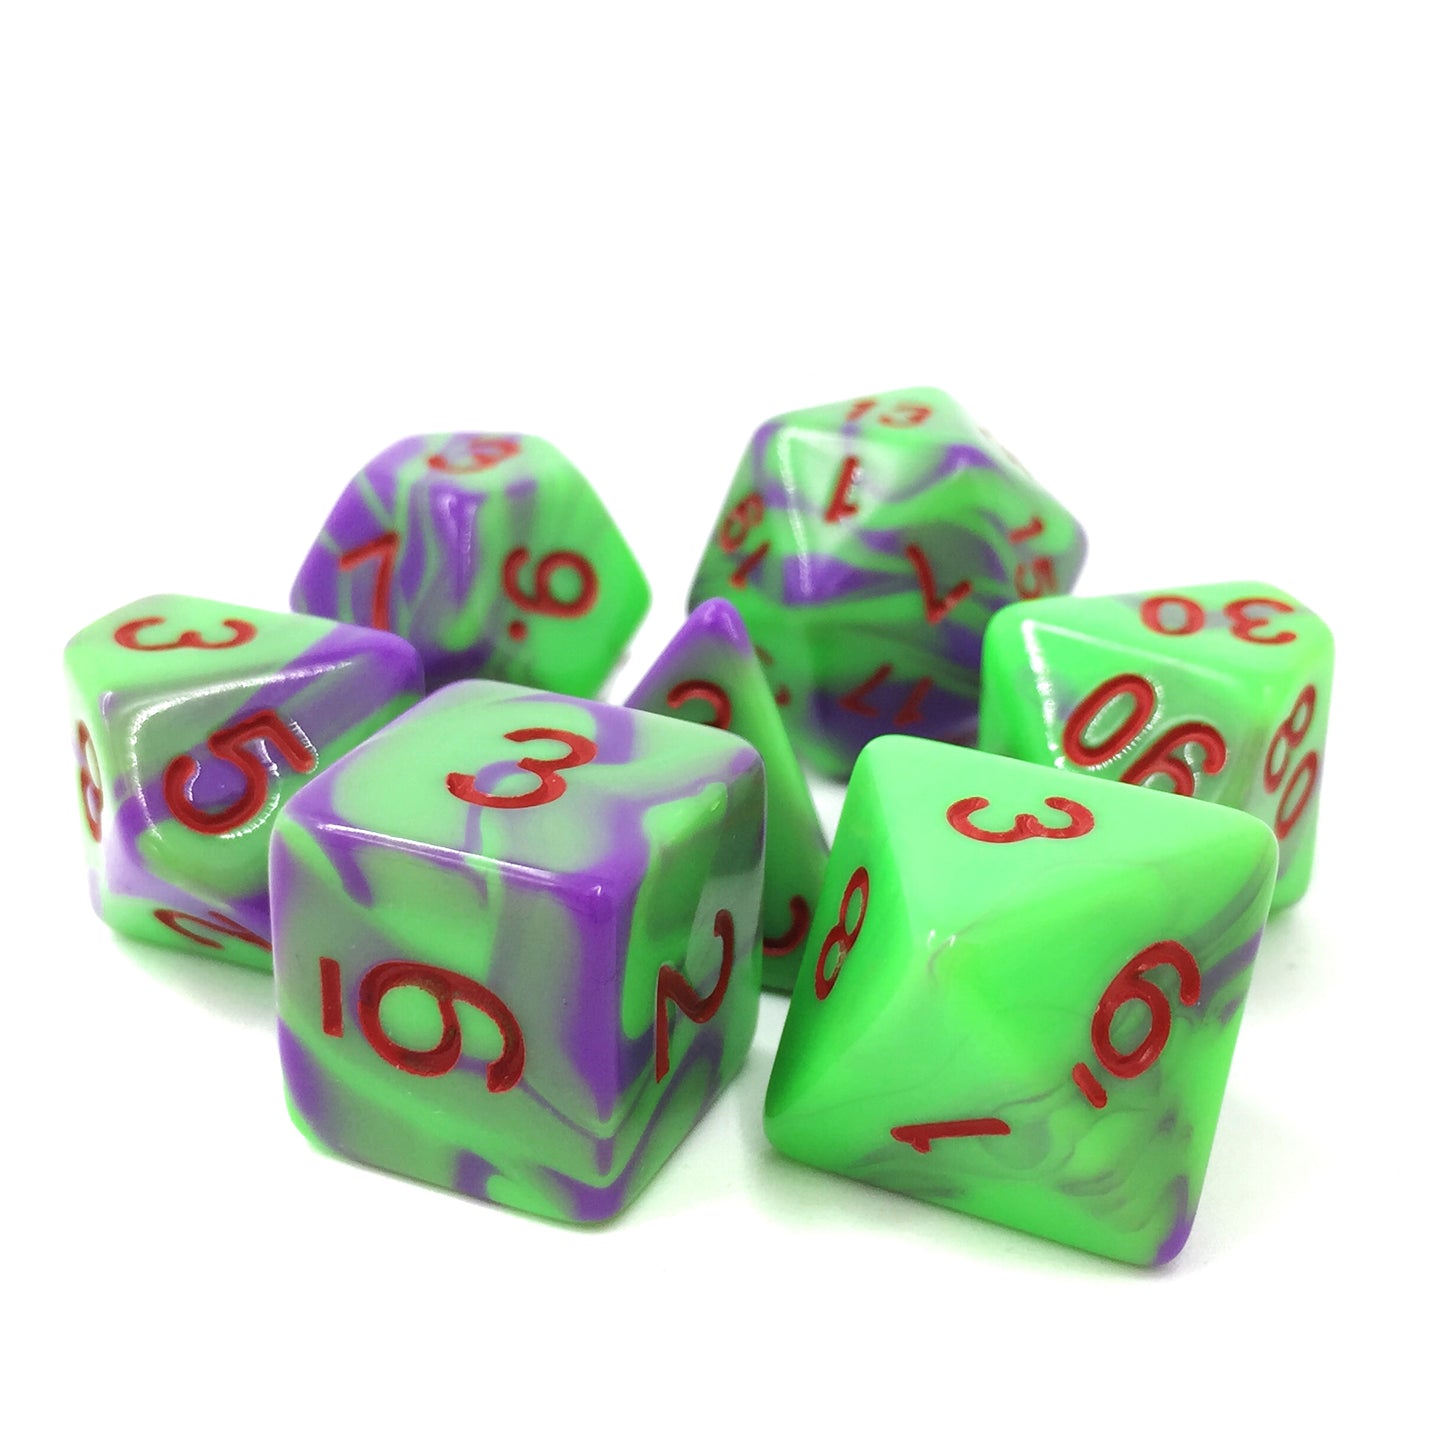 D20 Polyhedral 7 Piece Dice Set - Elemental - Purple/Green - Red Numbers